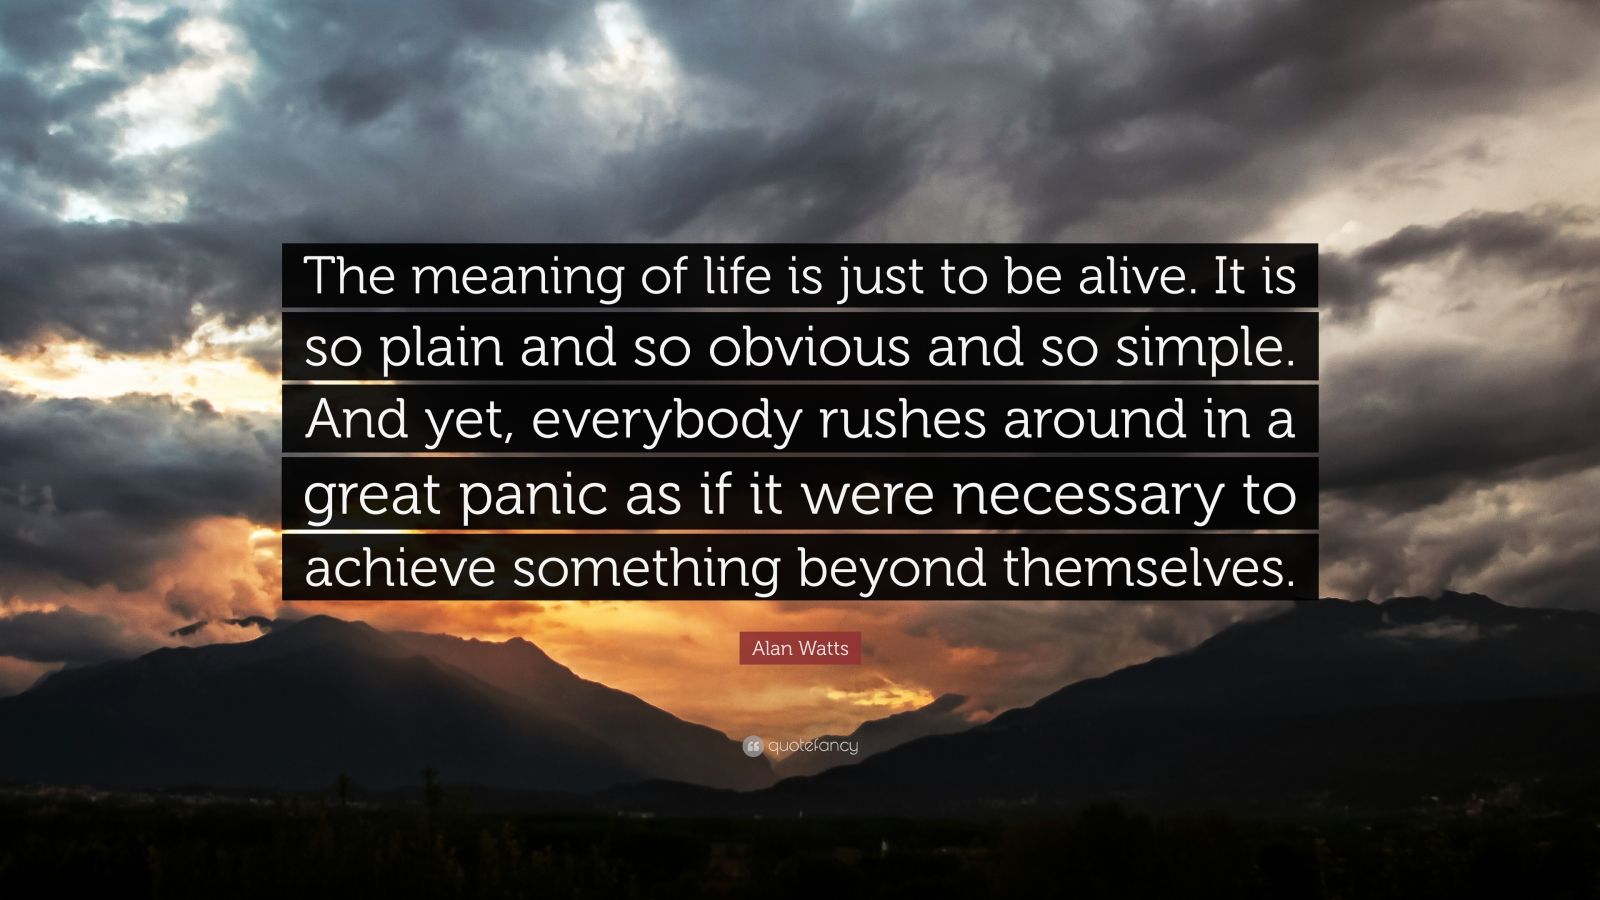 Alan Watts Quote: “The meaning of life is just to be alive. It is so